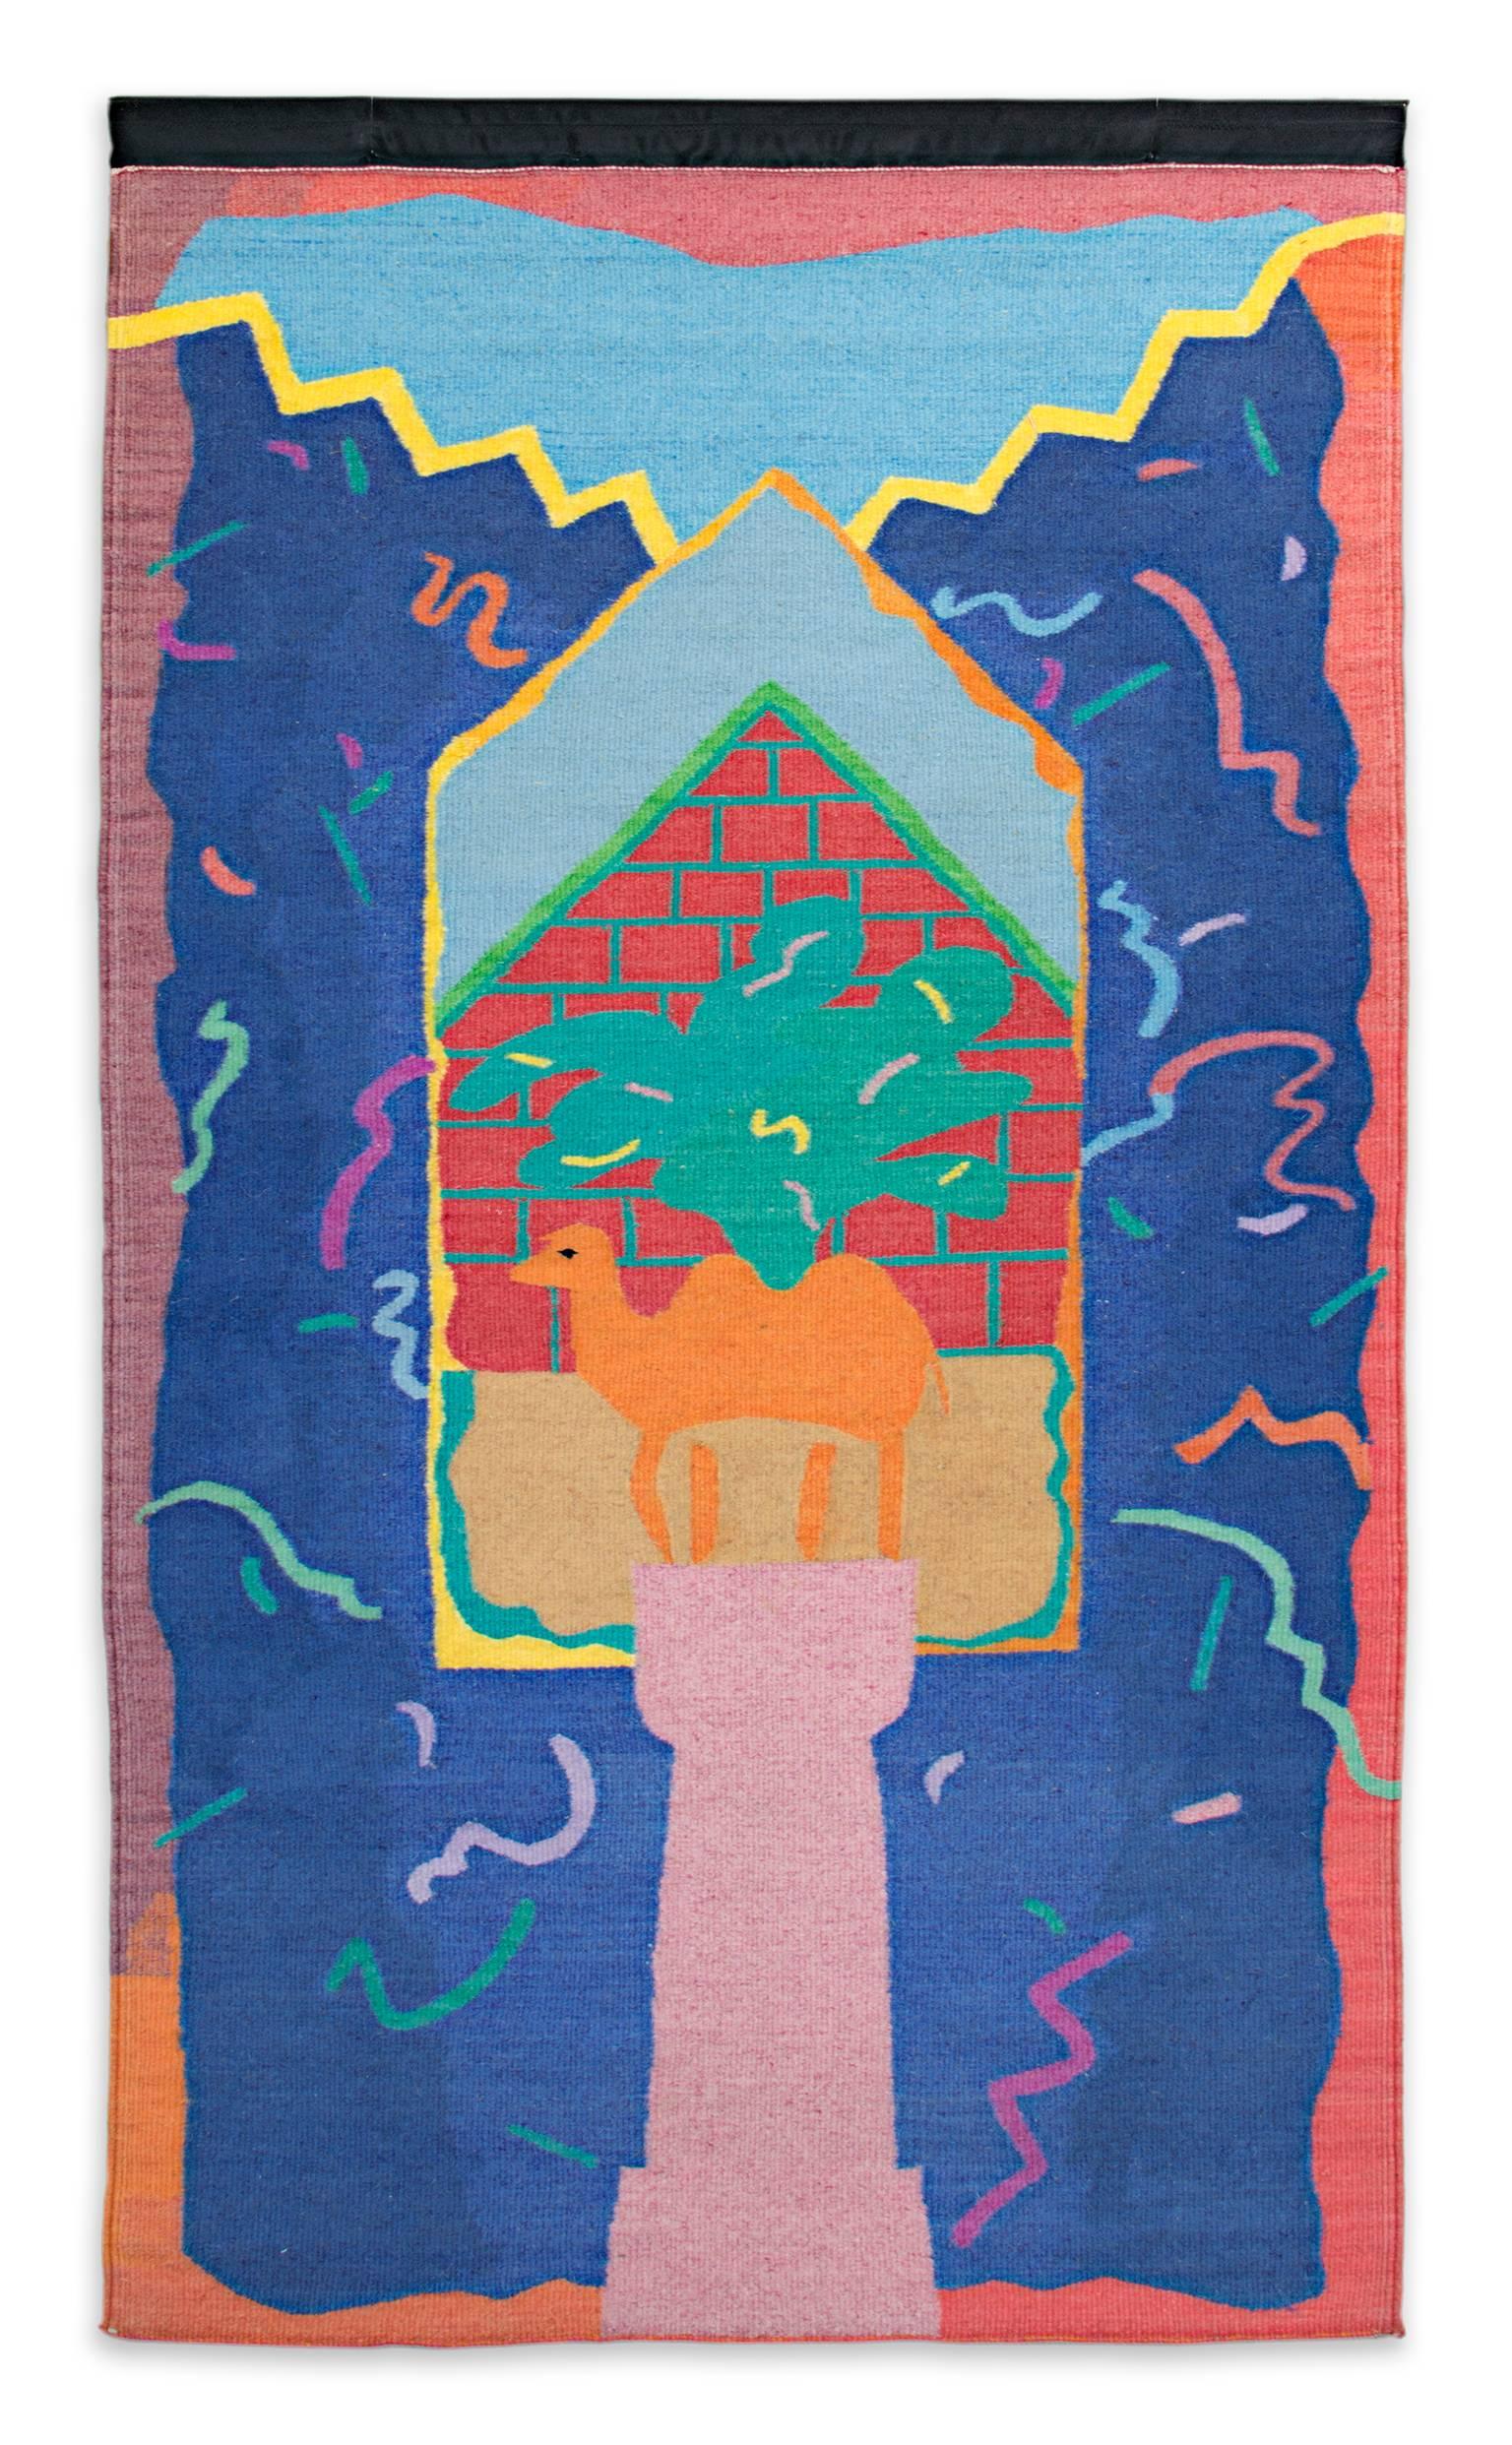 Egyptian Wool Woven Tapestry Bright Colorful Abstract Contemporary Prayer World